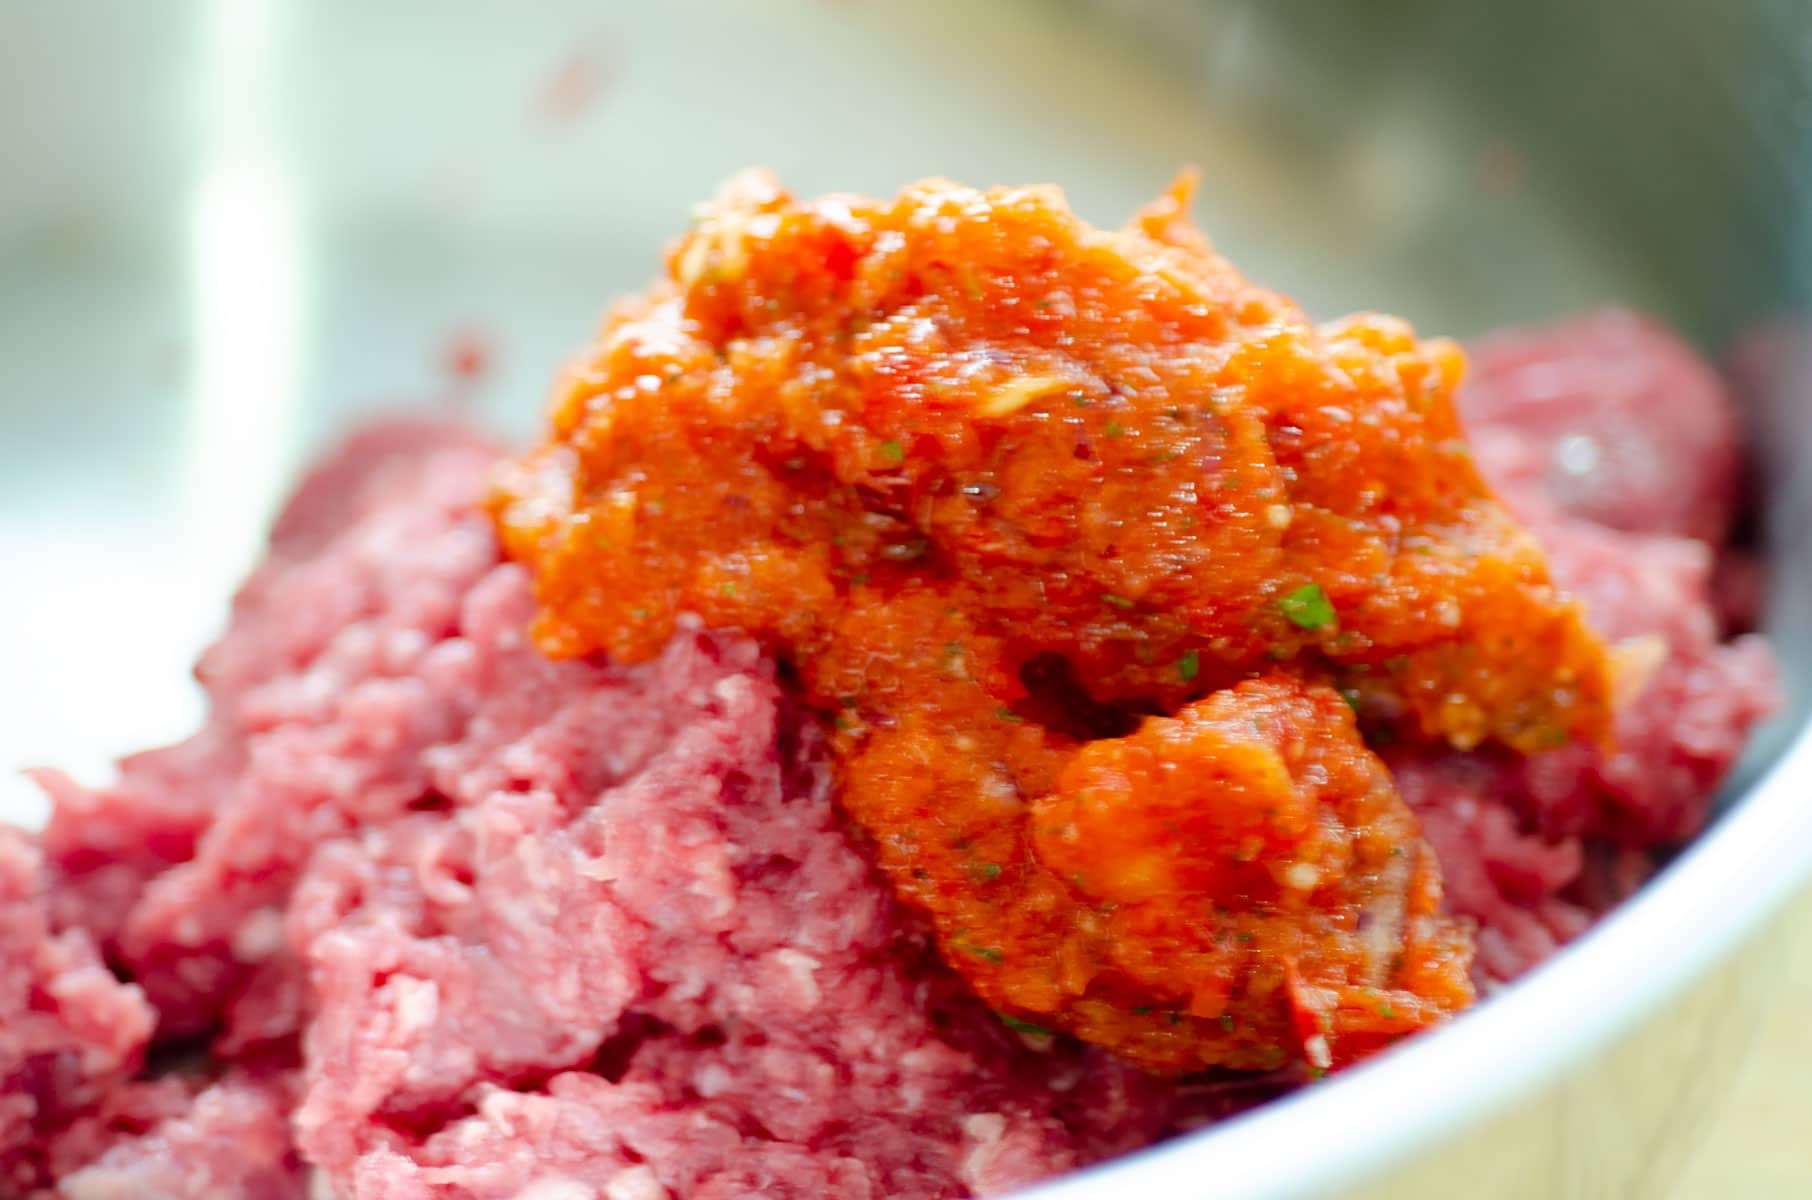 Adding seasoning paste to raw minced meat